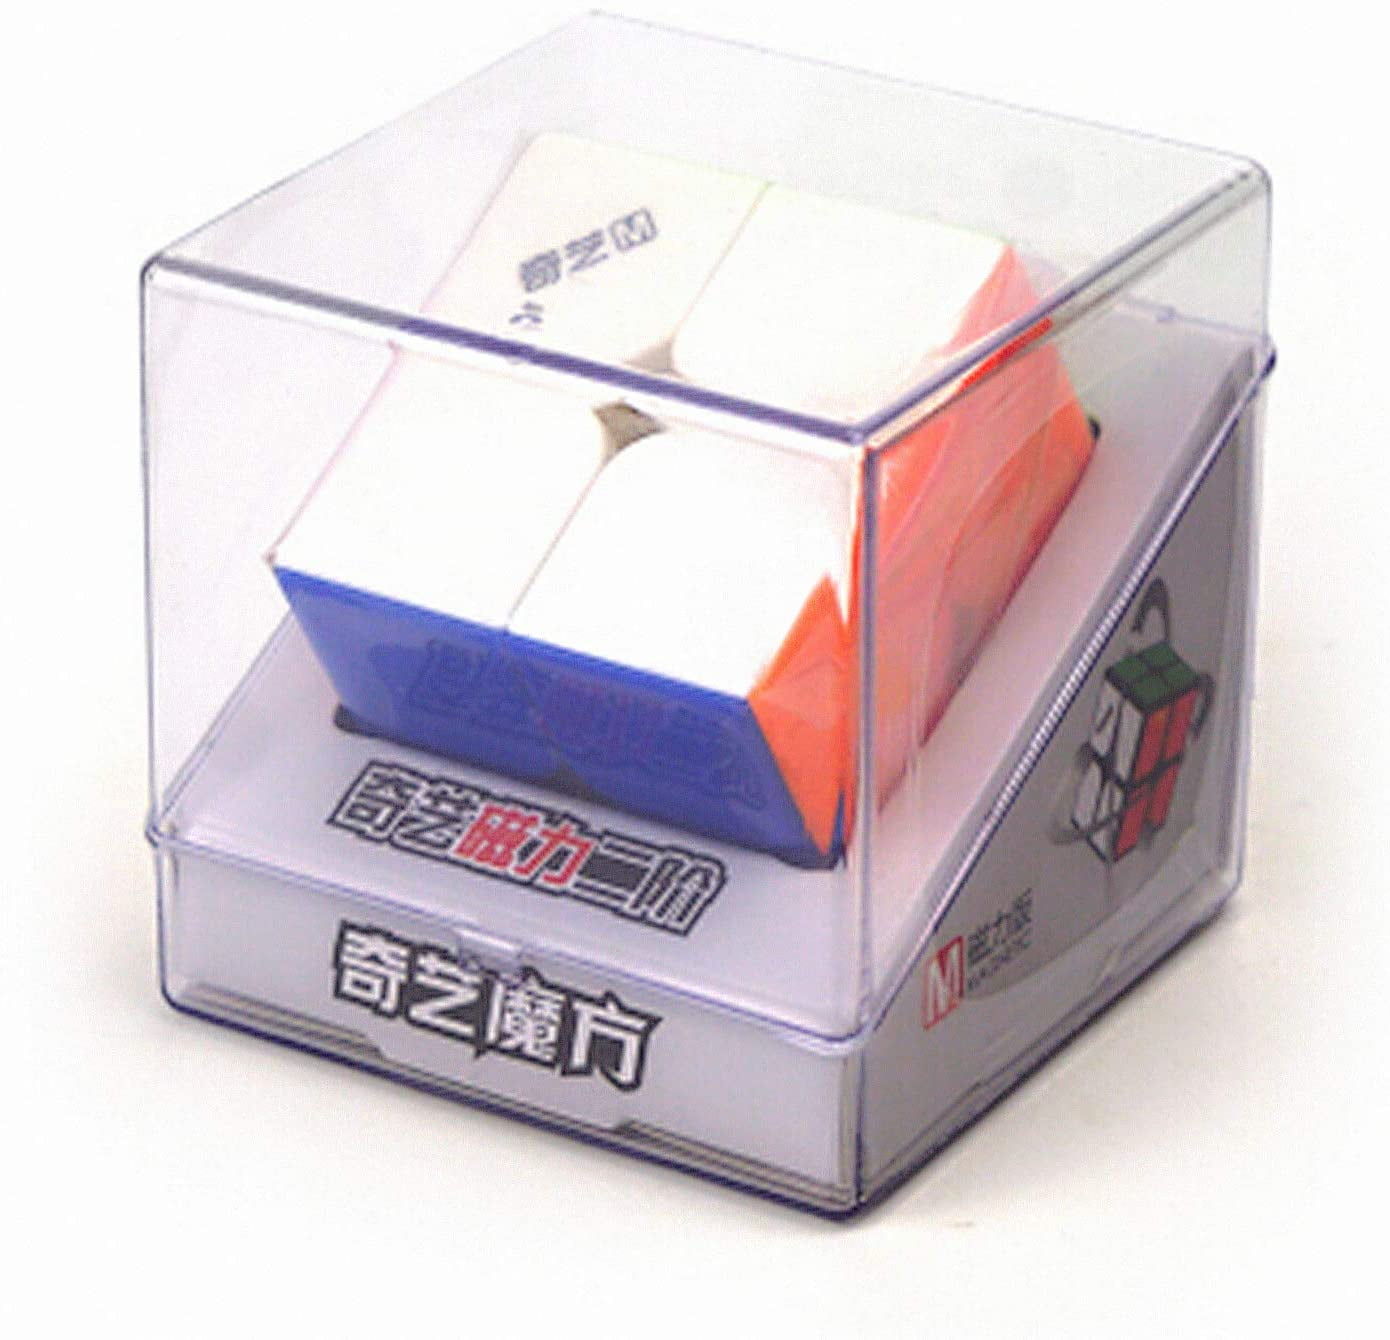 Details about   Master Kilominx Magic Cube Challenging Twist Spring Puzzle Learning Memory Toys 